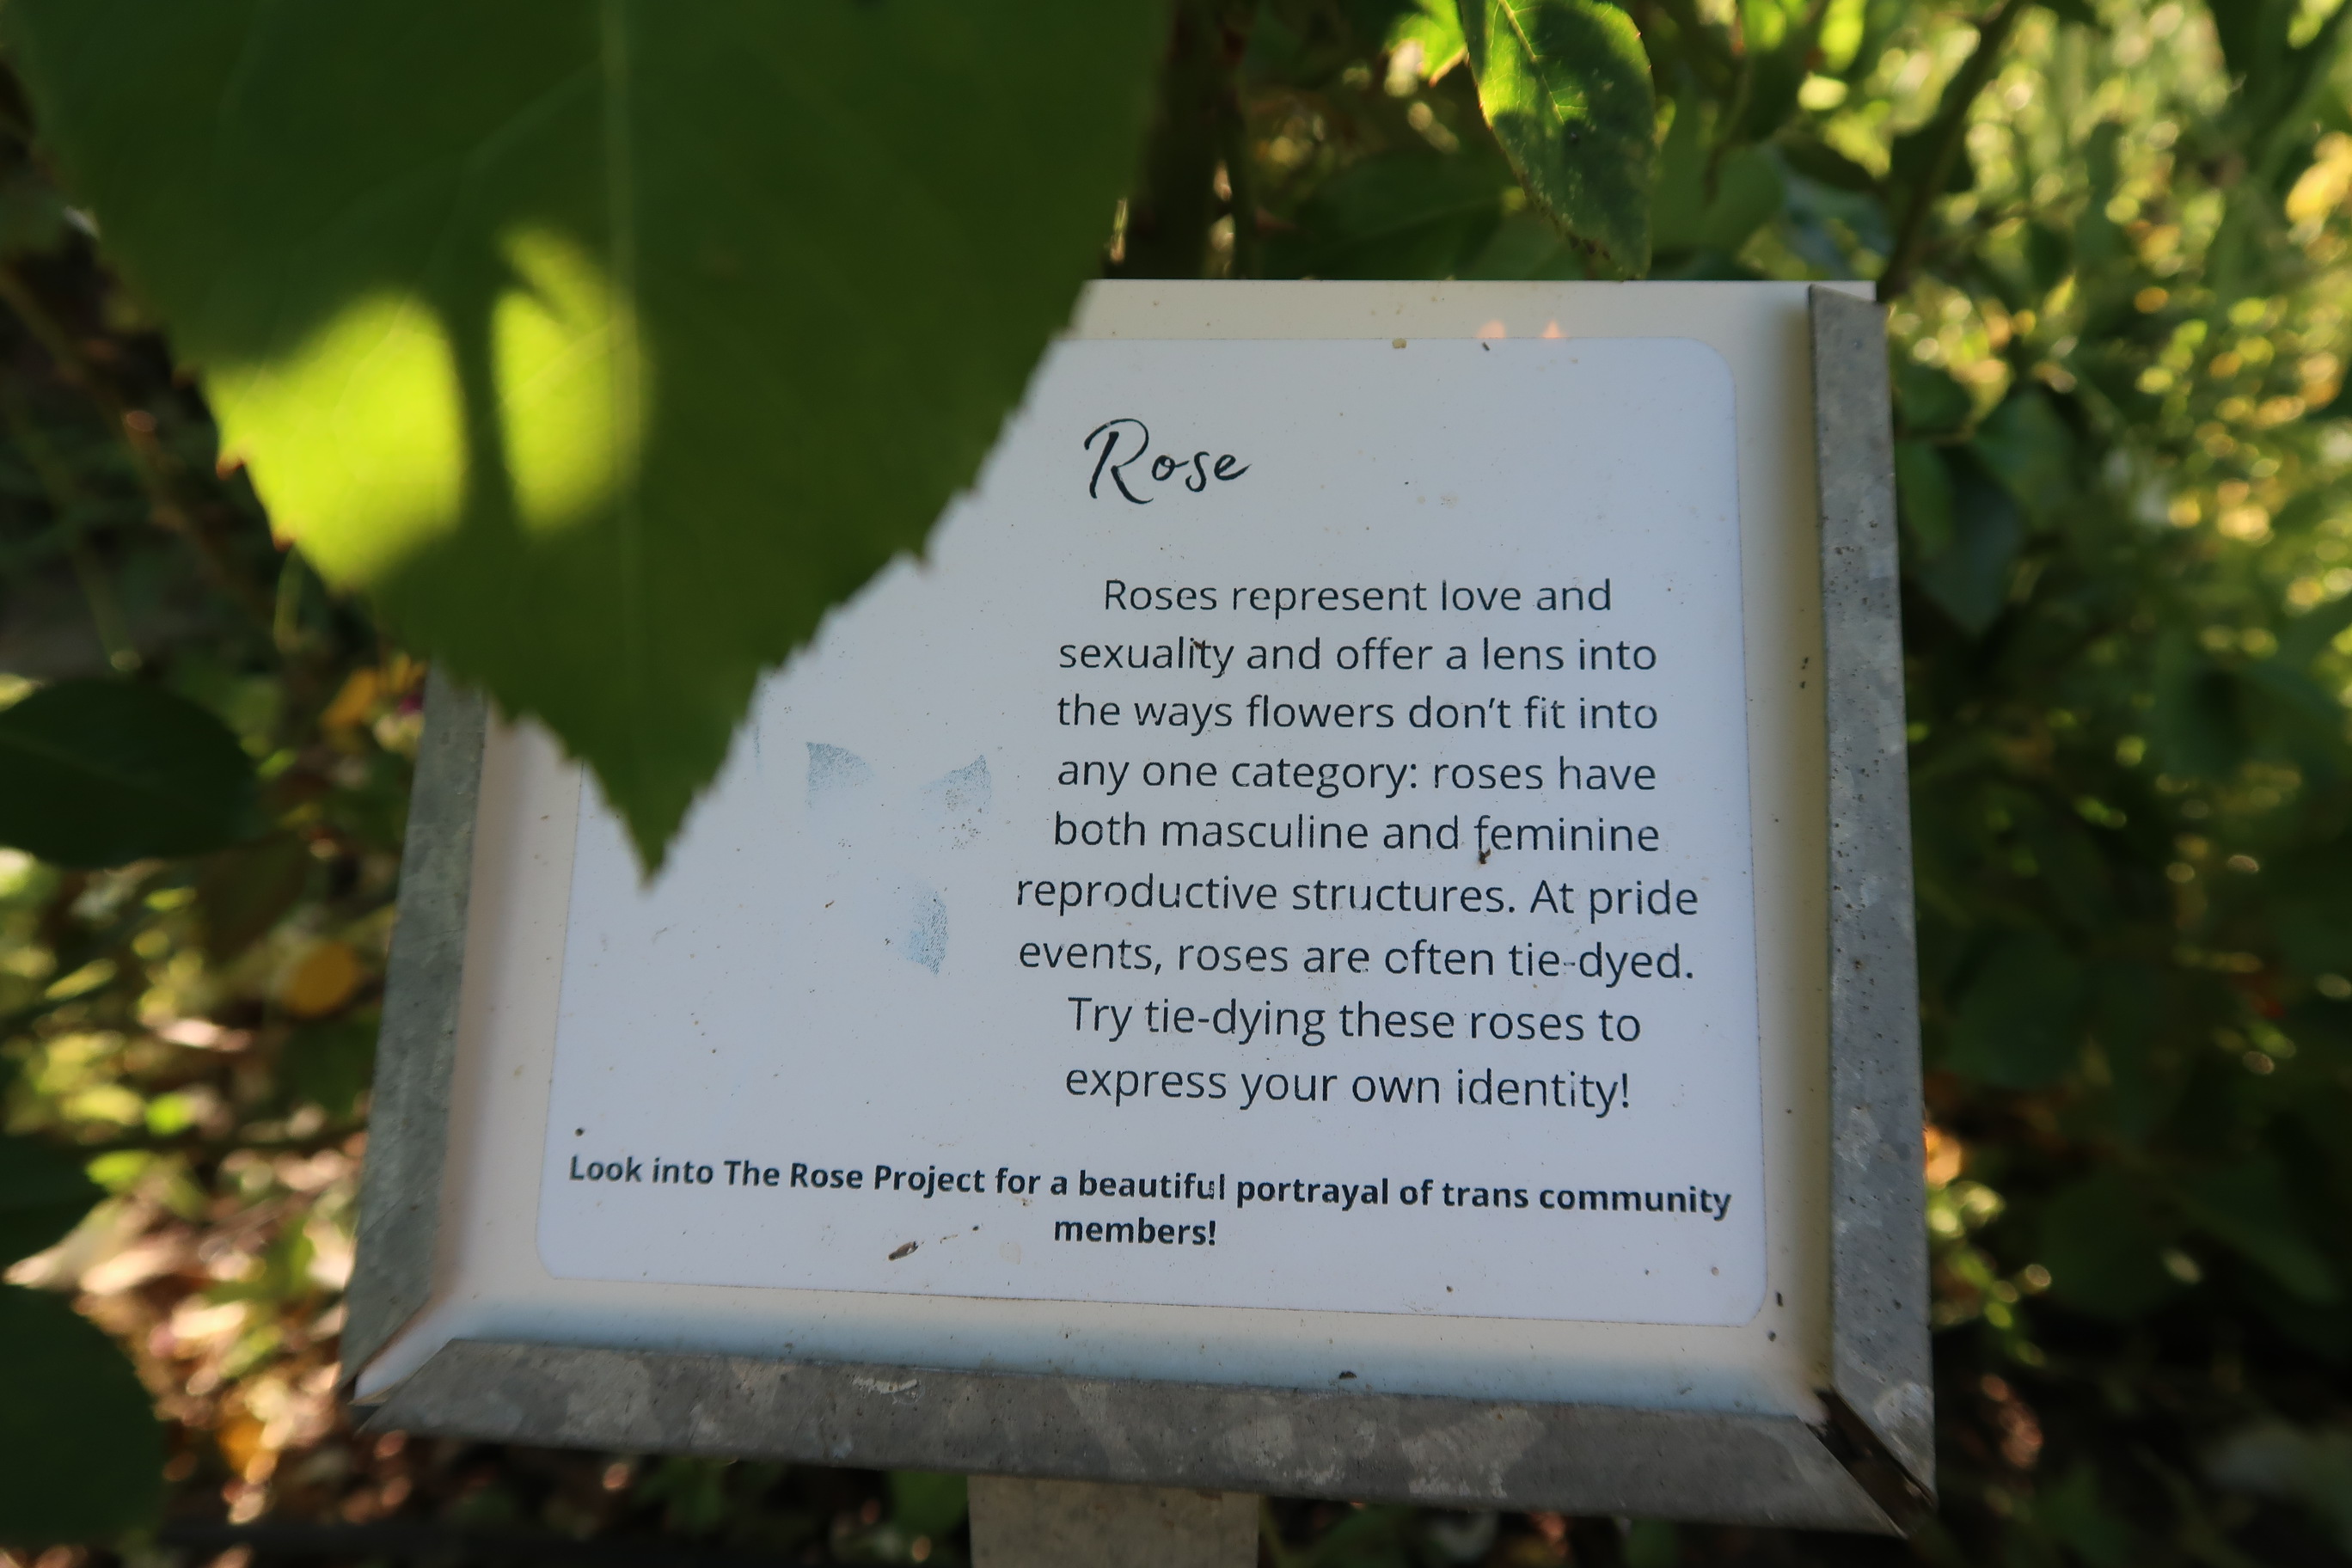 Informational placard about the rose's meaning to the queer garden